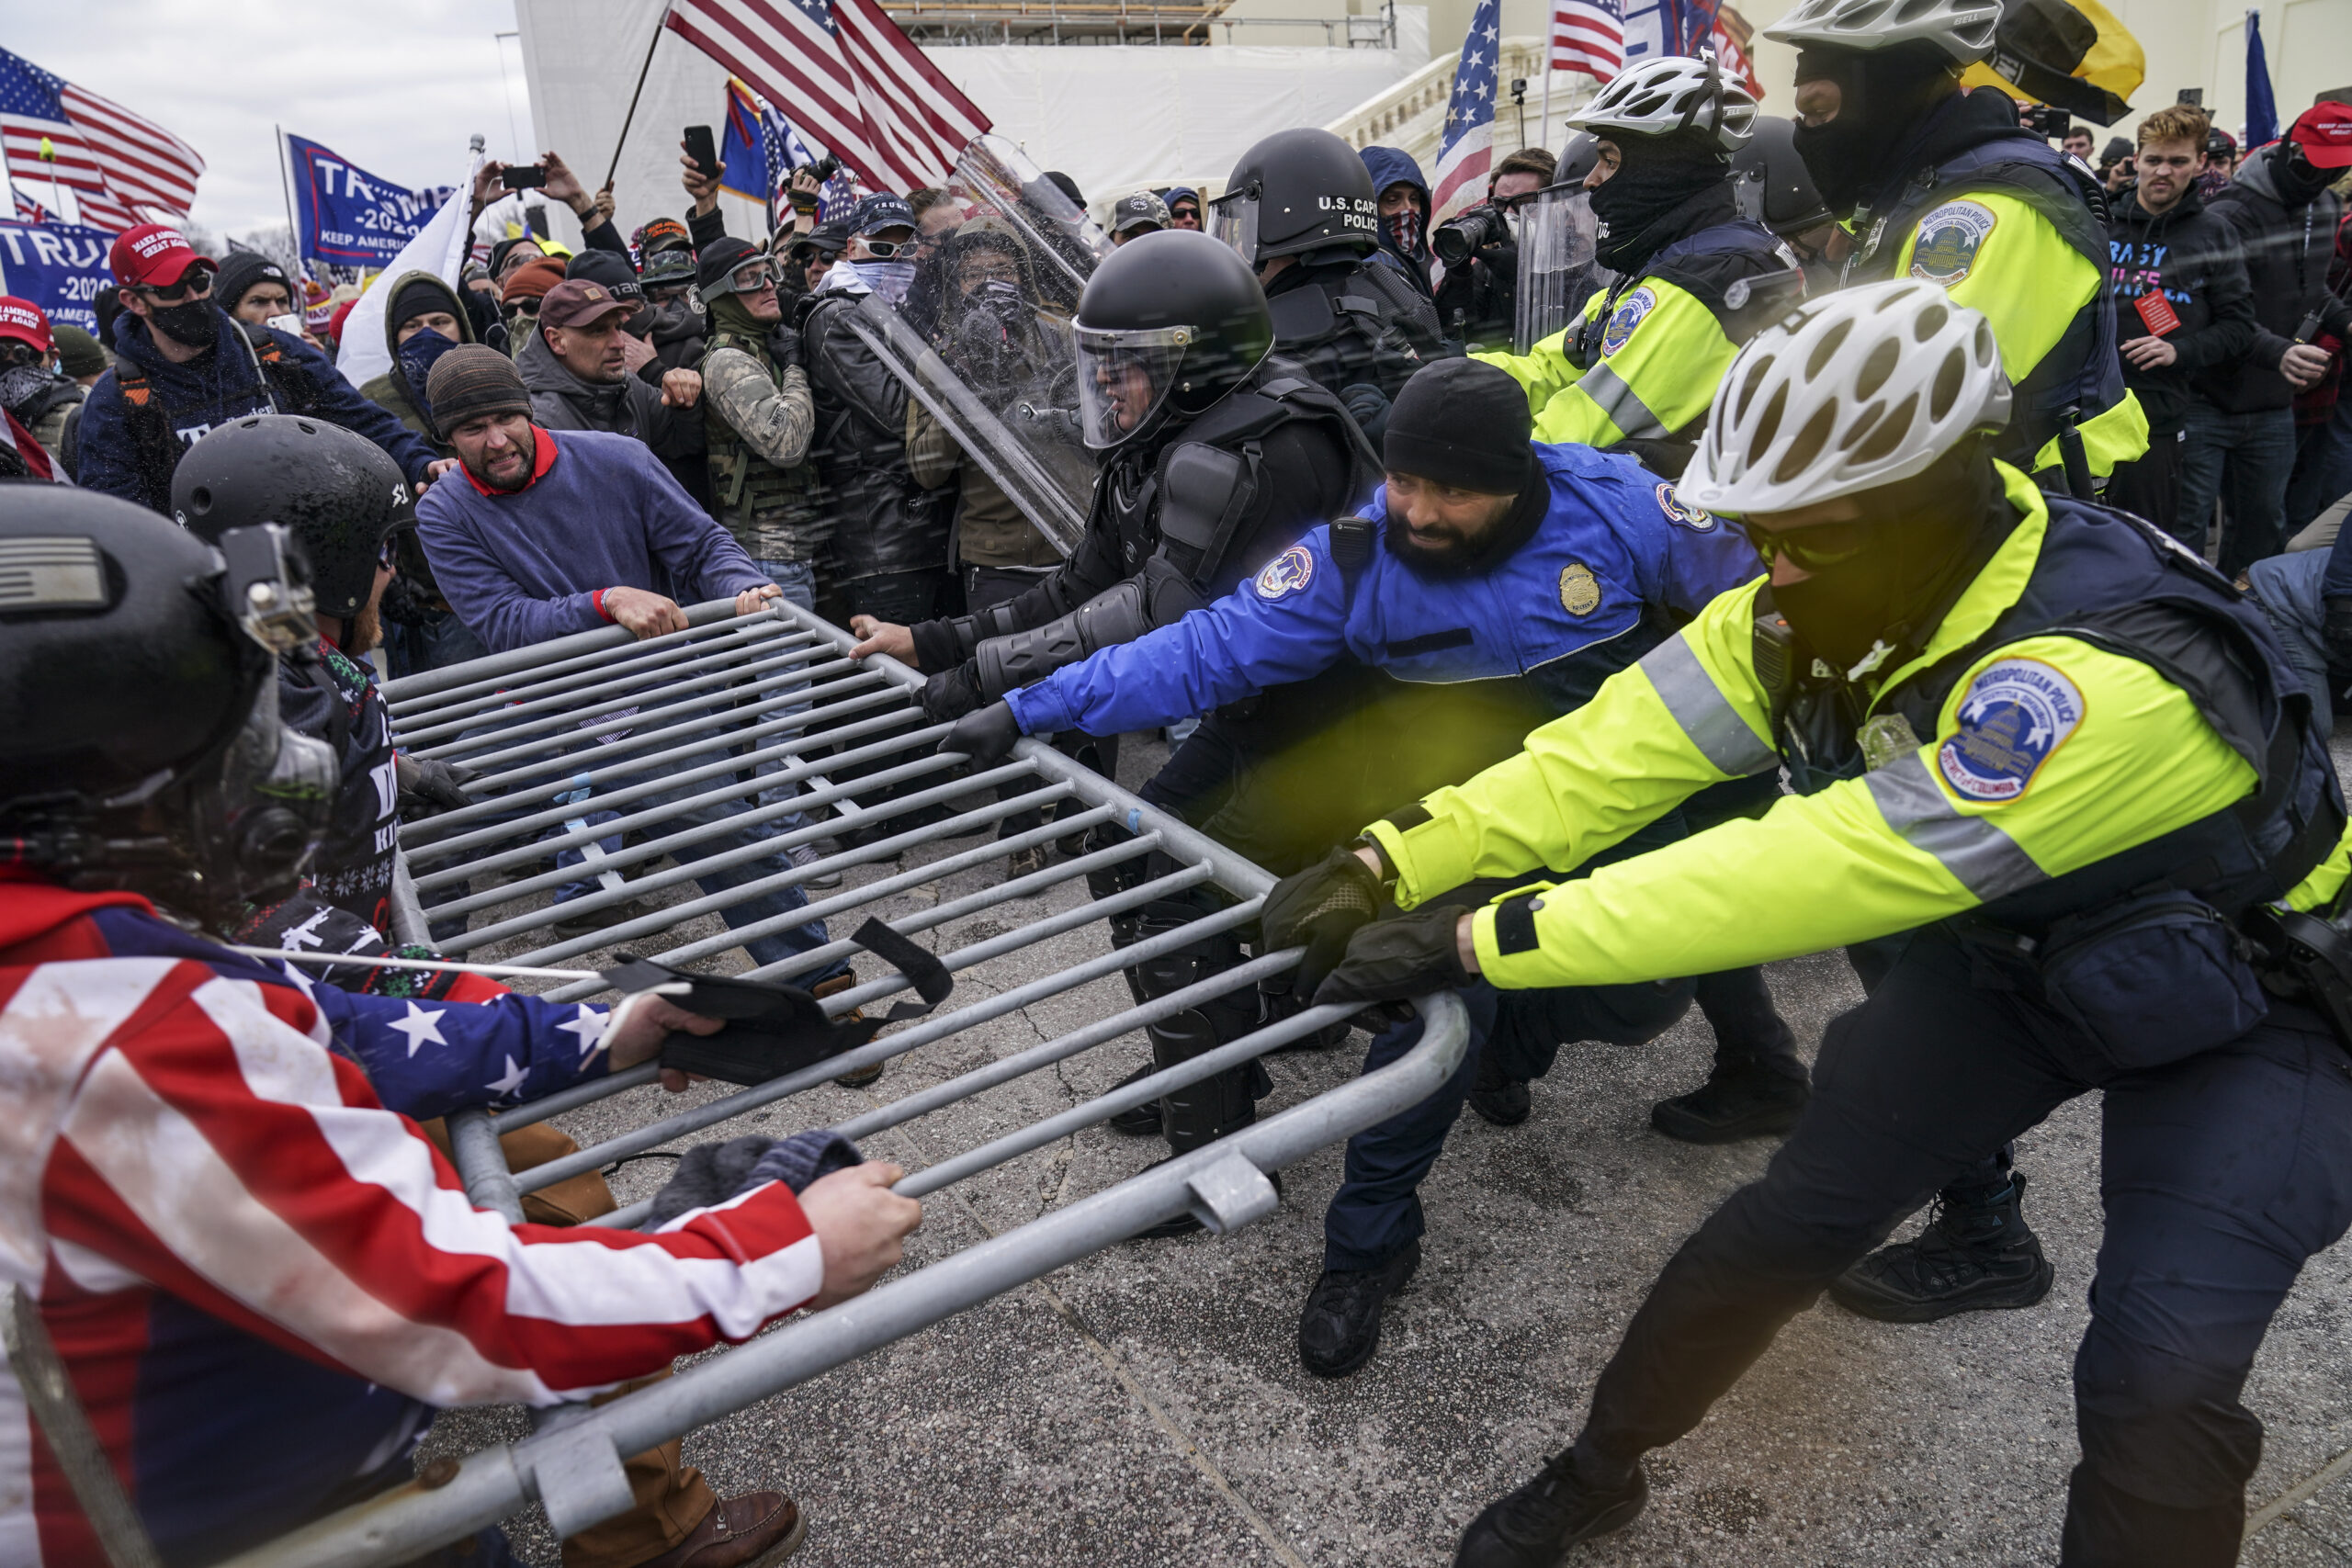 FILE - In this Jan. 6, 2021, file photo a violent mob of Trump supporters try to break through a police barrier at the Capitol in Washington. Violent extremists motivated by political grievances and racial biases pose an “elevated threat” to the U.S. homeland, officials said Wednesday, March 17, in a unclassified intelligence report released more than two months after a violent mob of insurrectionists stormed the U.S. Capitol. (AP Photo/John Minchillo File)